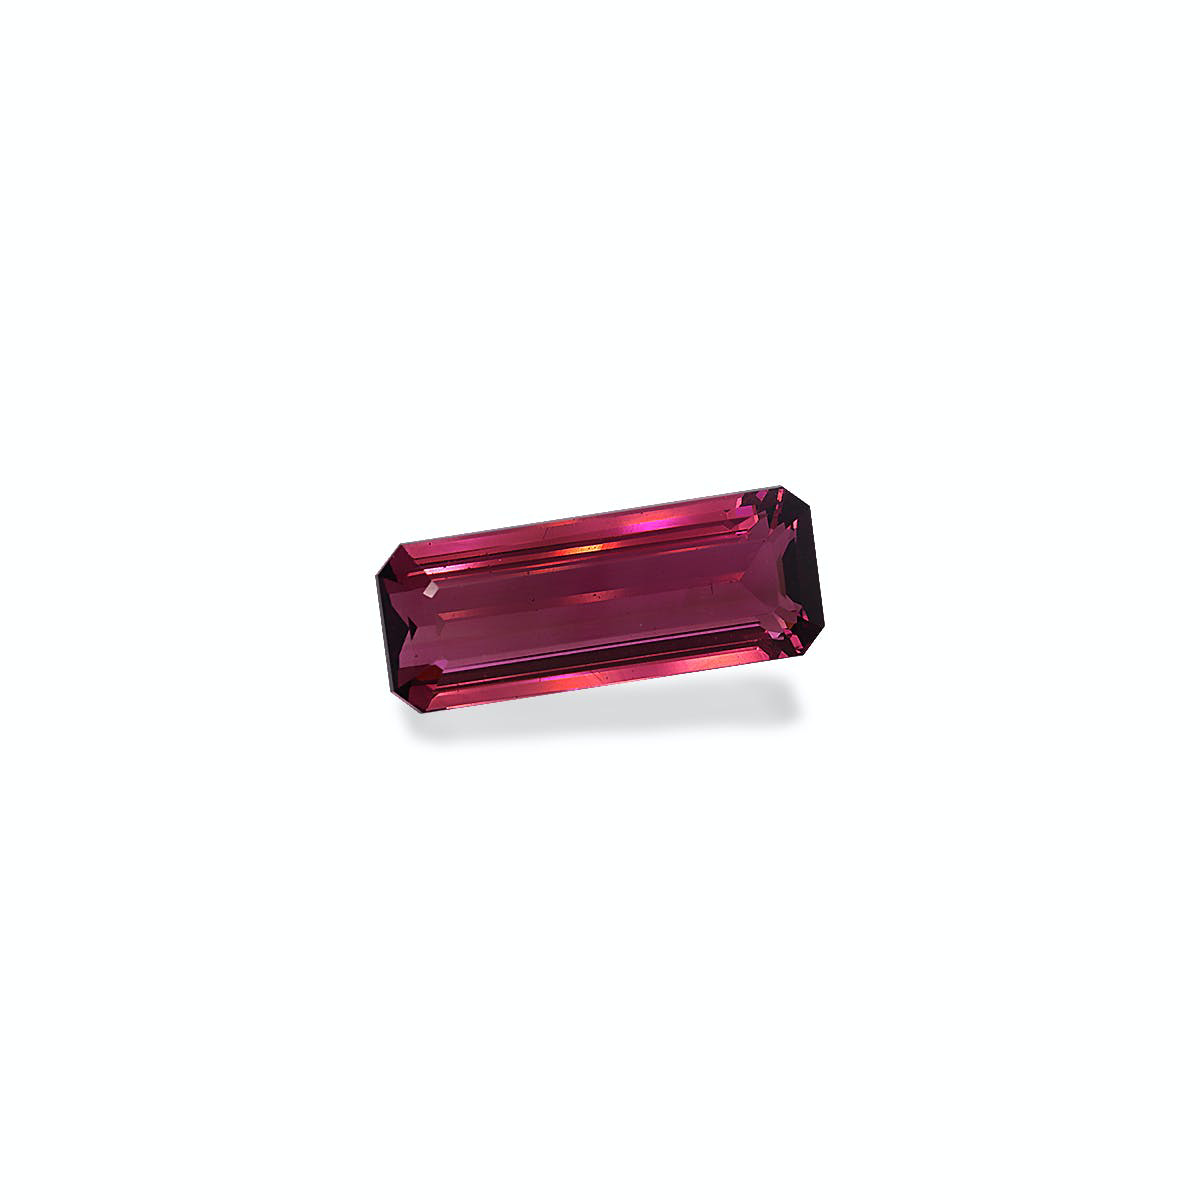 Picture of Pink Tourmaline 16.80ct (PT0453)